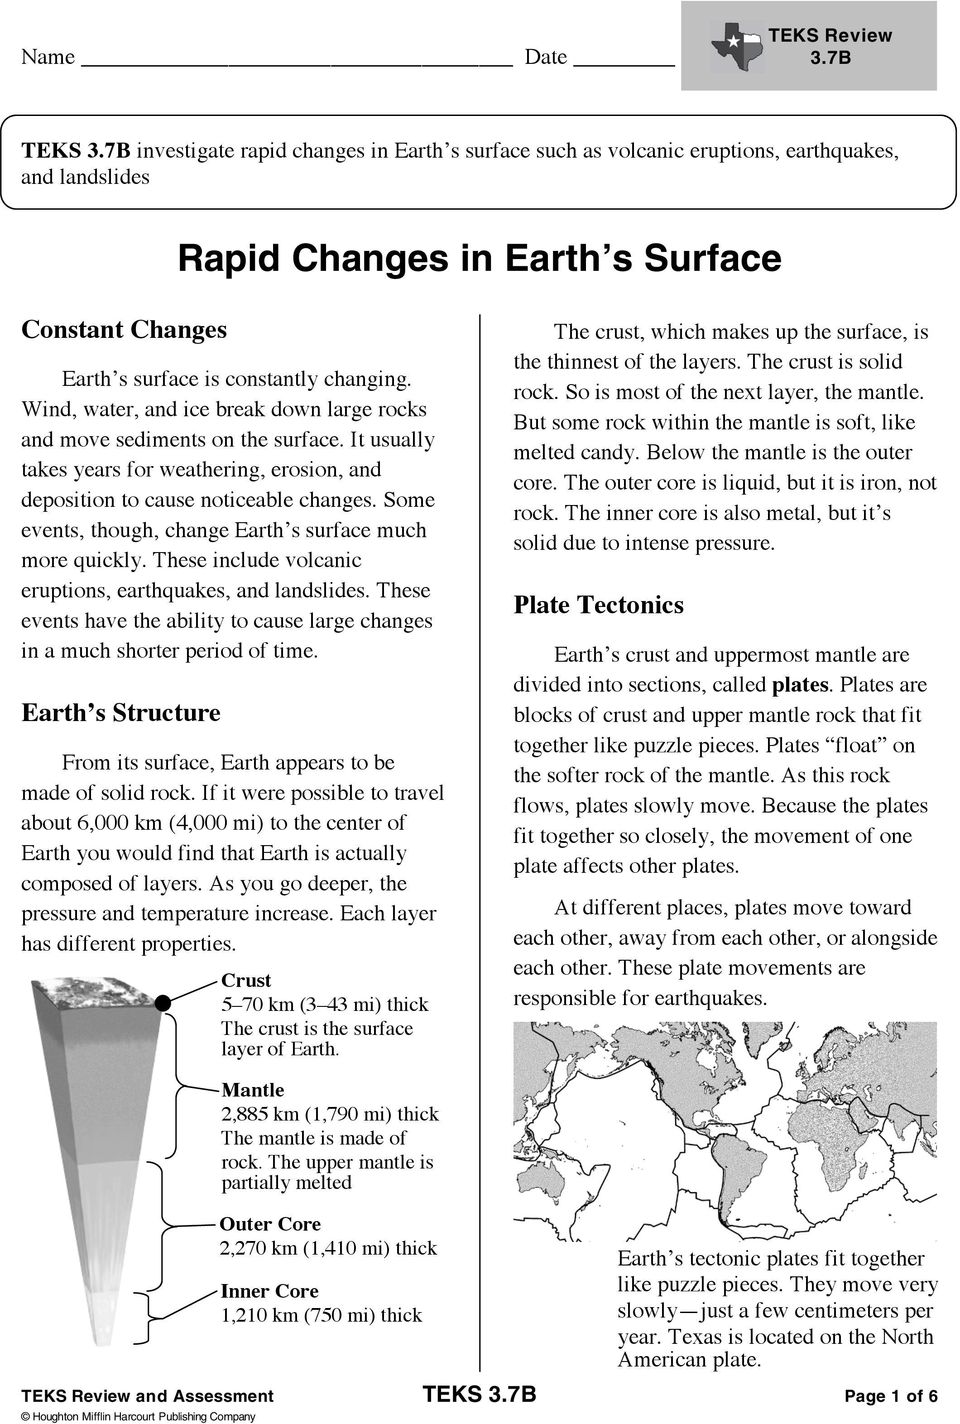 Some events, though, change Earth s surface much more quickly. These include volcanic eruptions, earthquakes, and landslides.